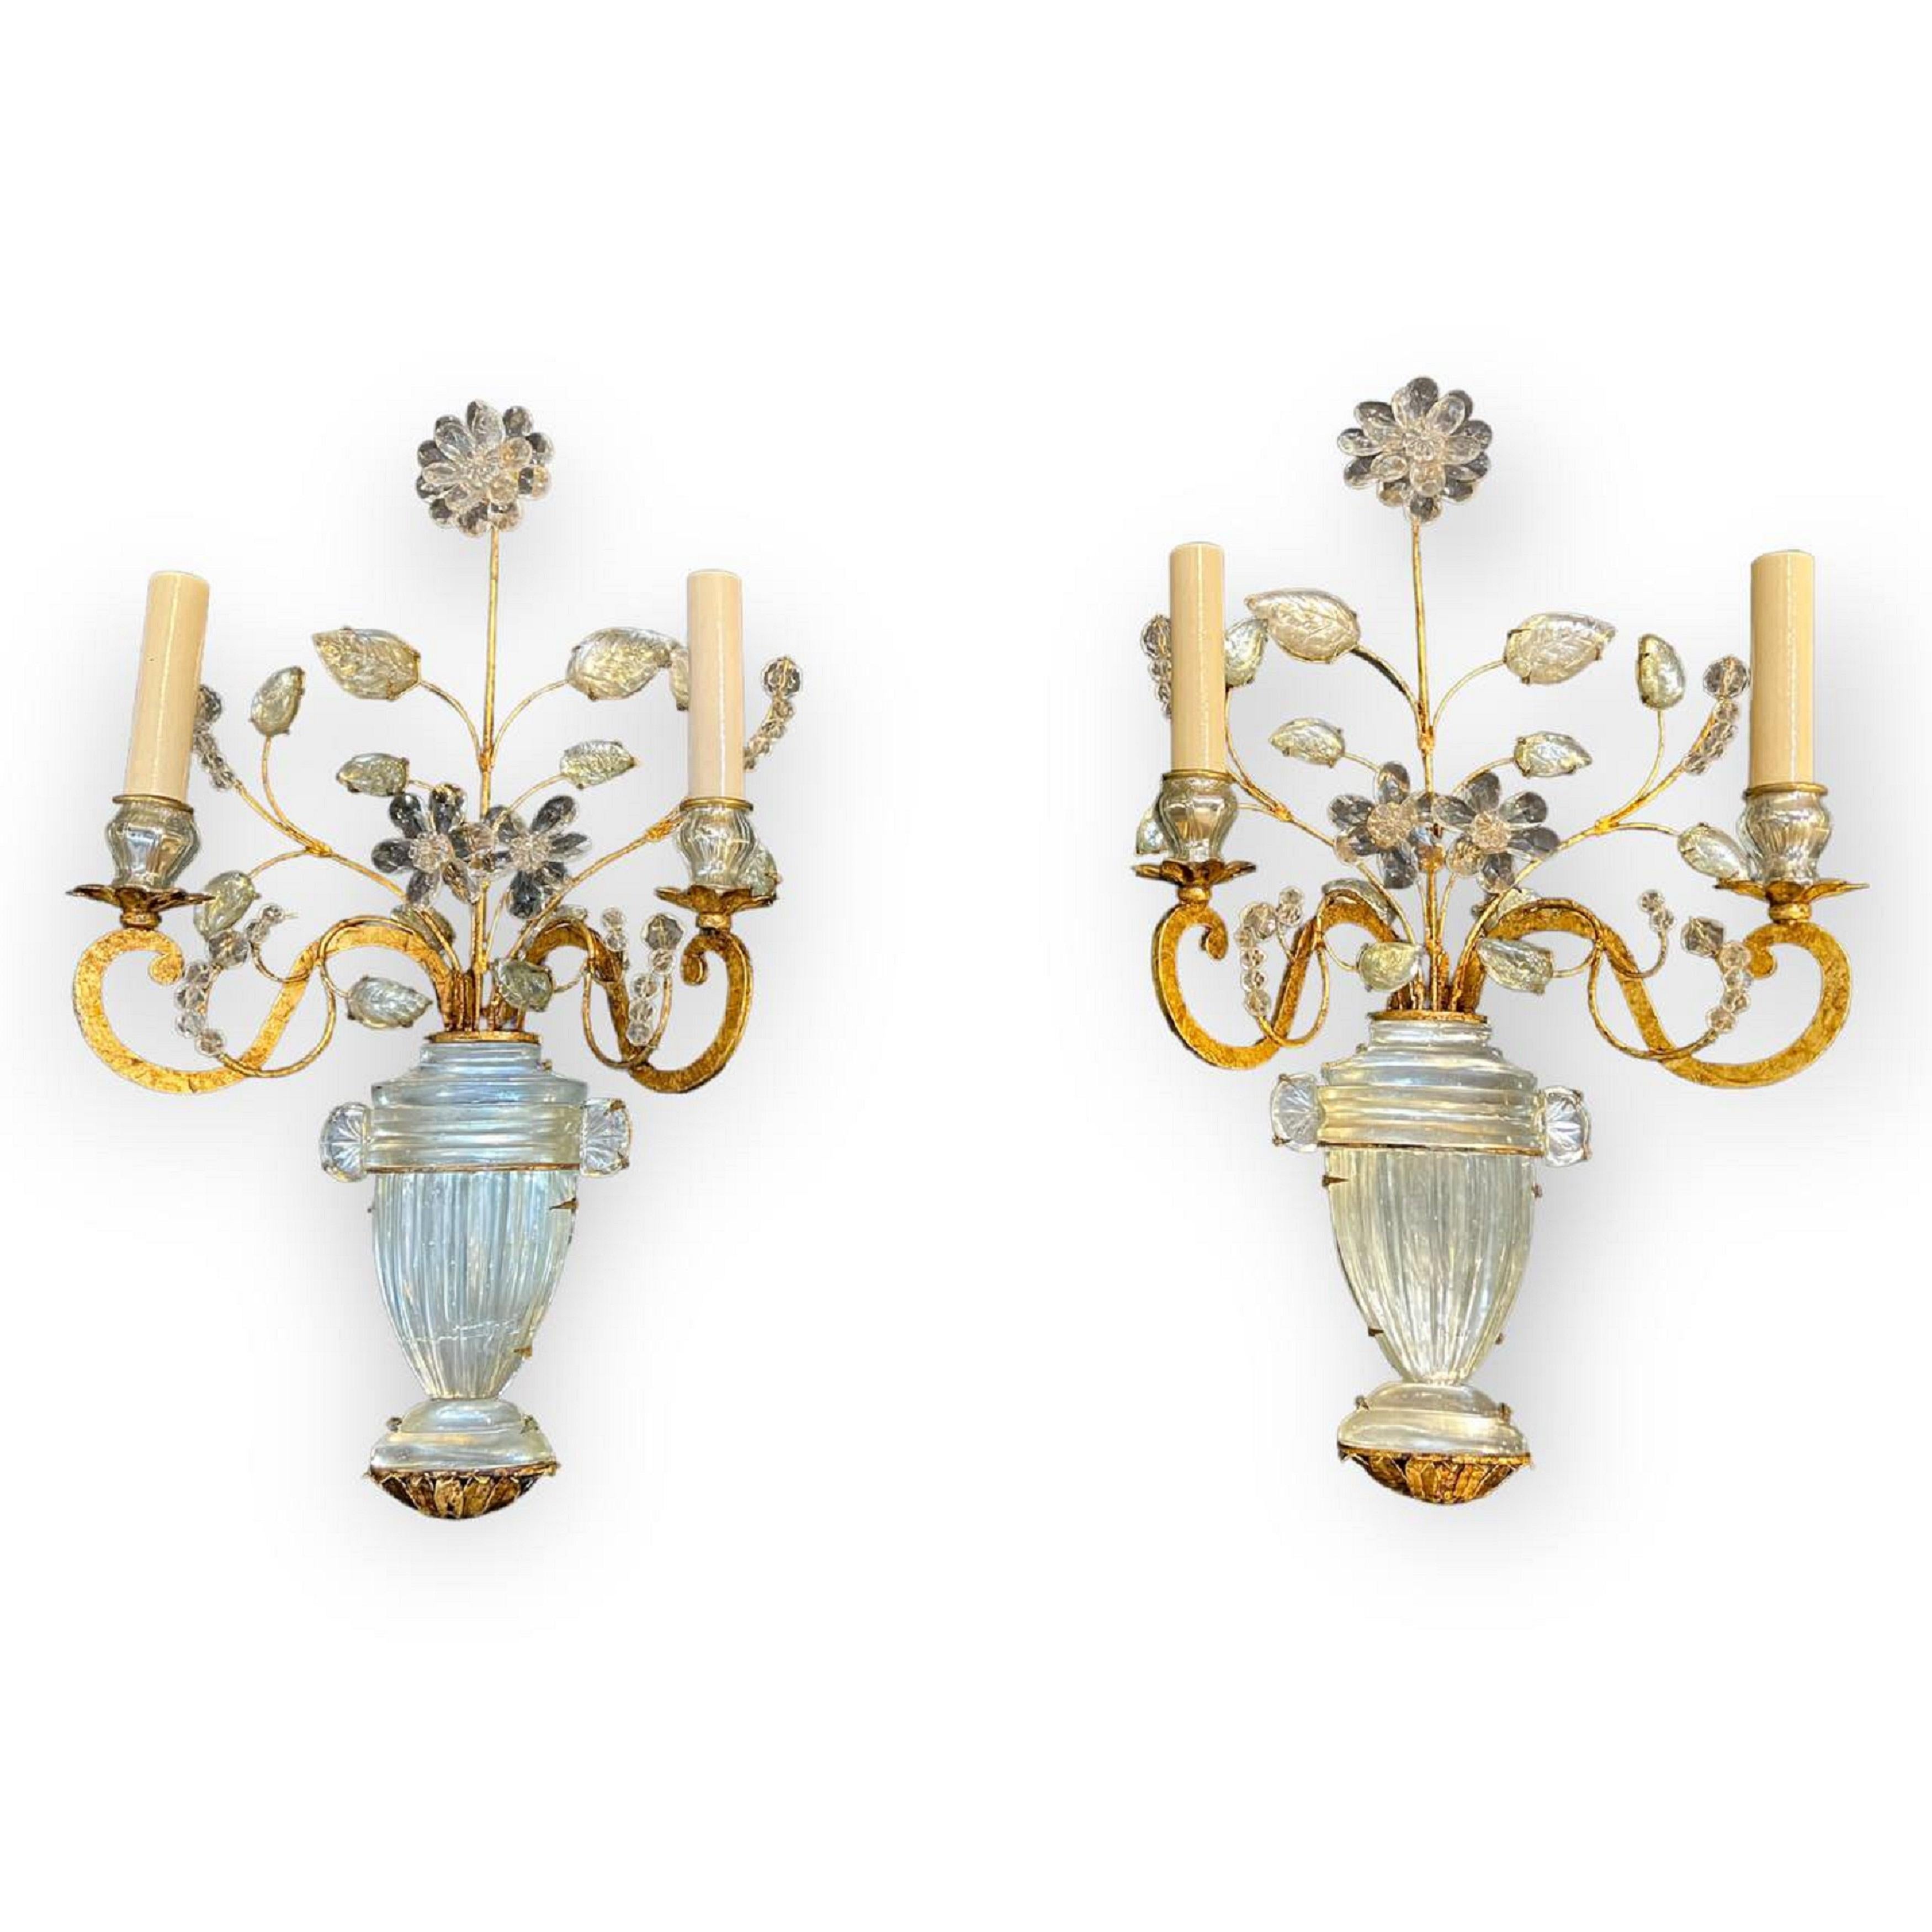 A pair of circa 1940’s French Bagues crystal sconces with two lights and vase with flowers design. 3 pairs available -price per pair. In very good vintage condition. Lamp shade not included. 

Up to 120V (US Standard)
Hardwired

Dealer: G302YP 

